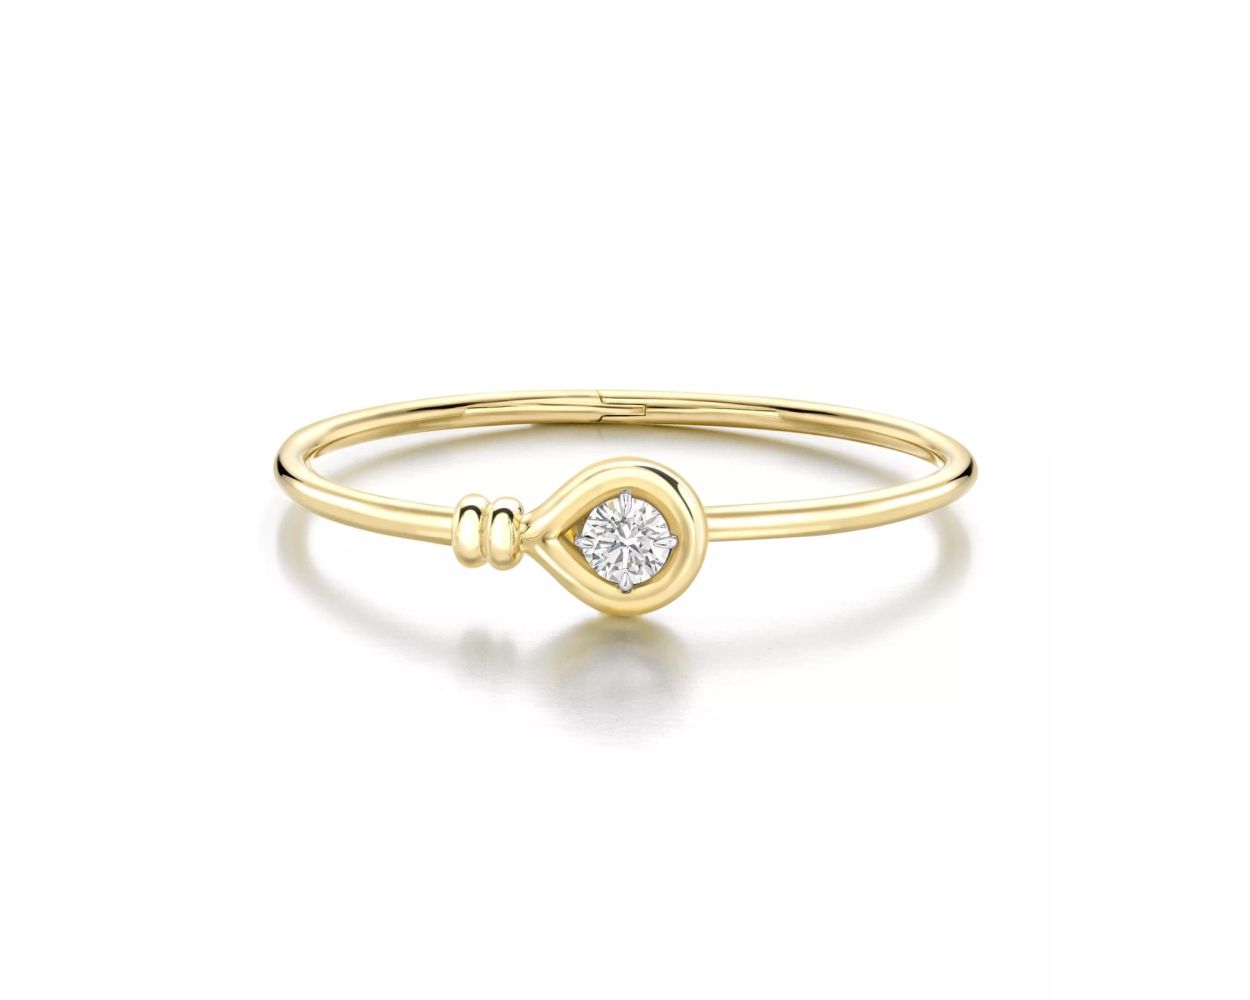 Forget Me Knot Bangle | Jessica McCormack